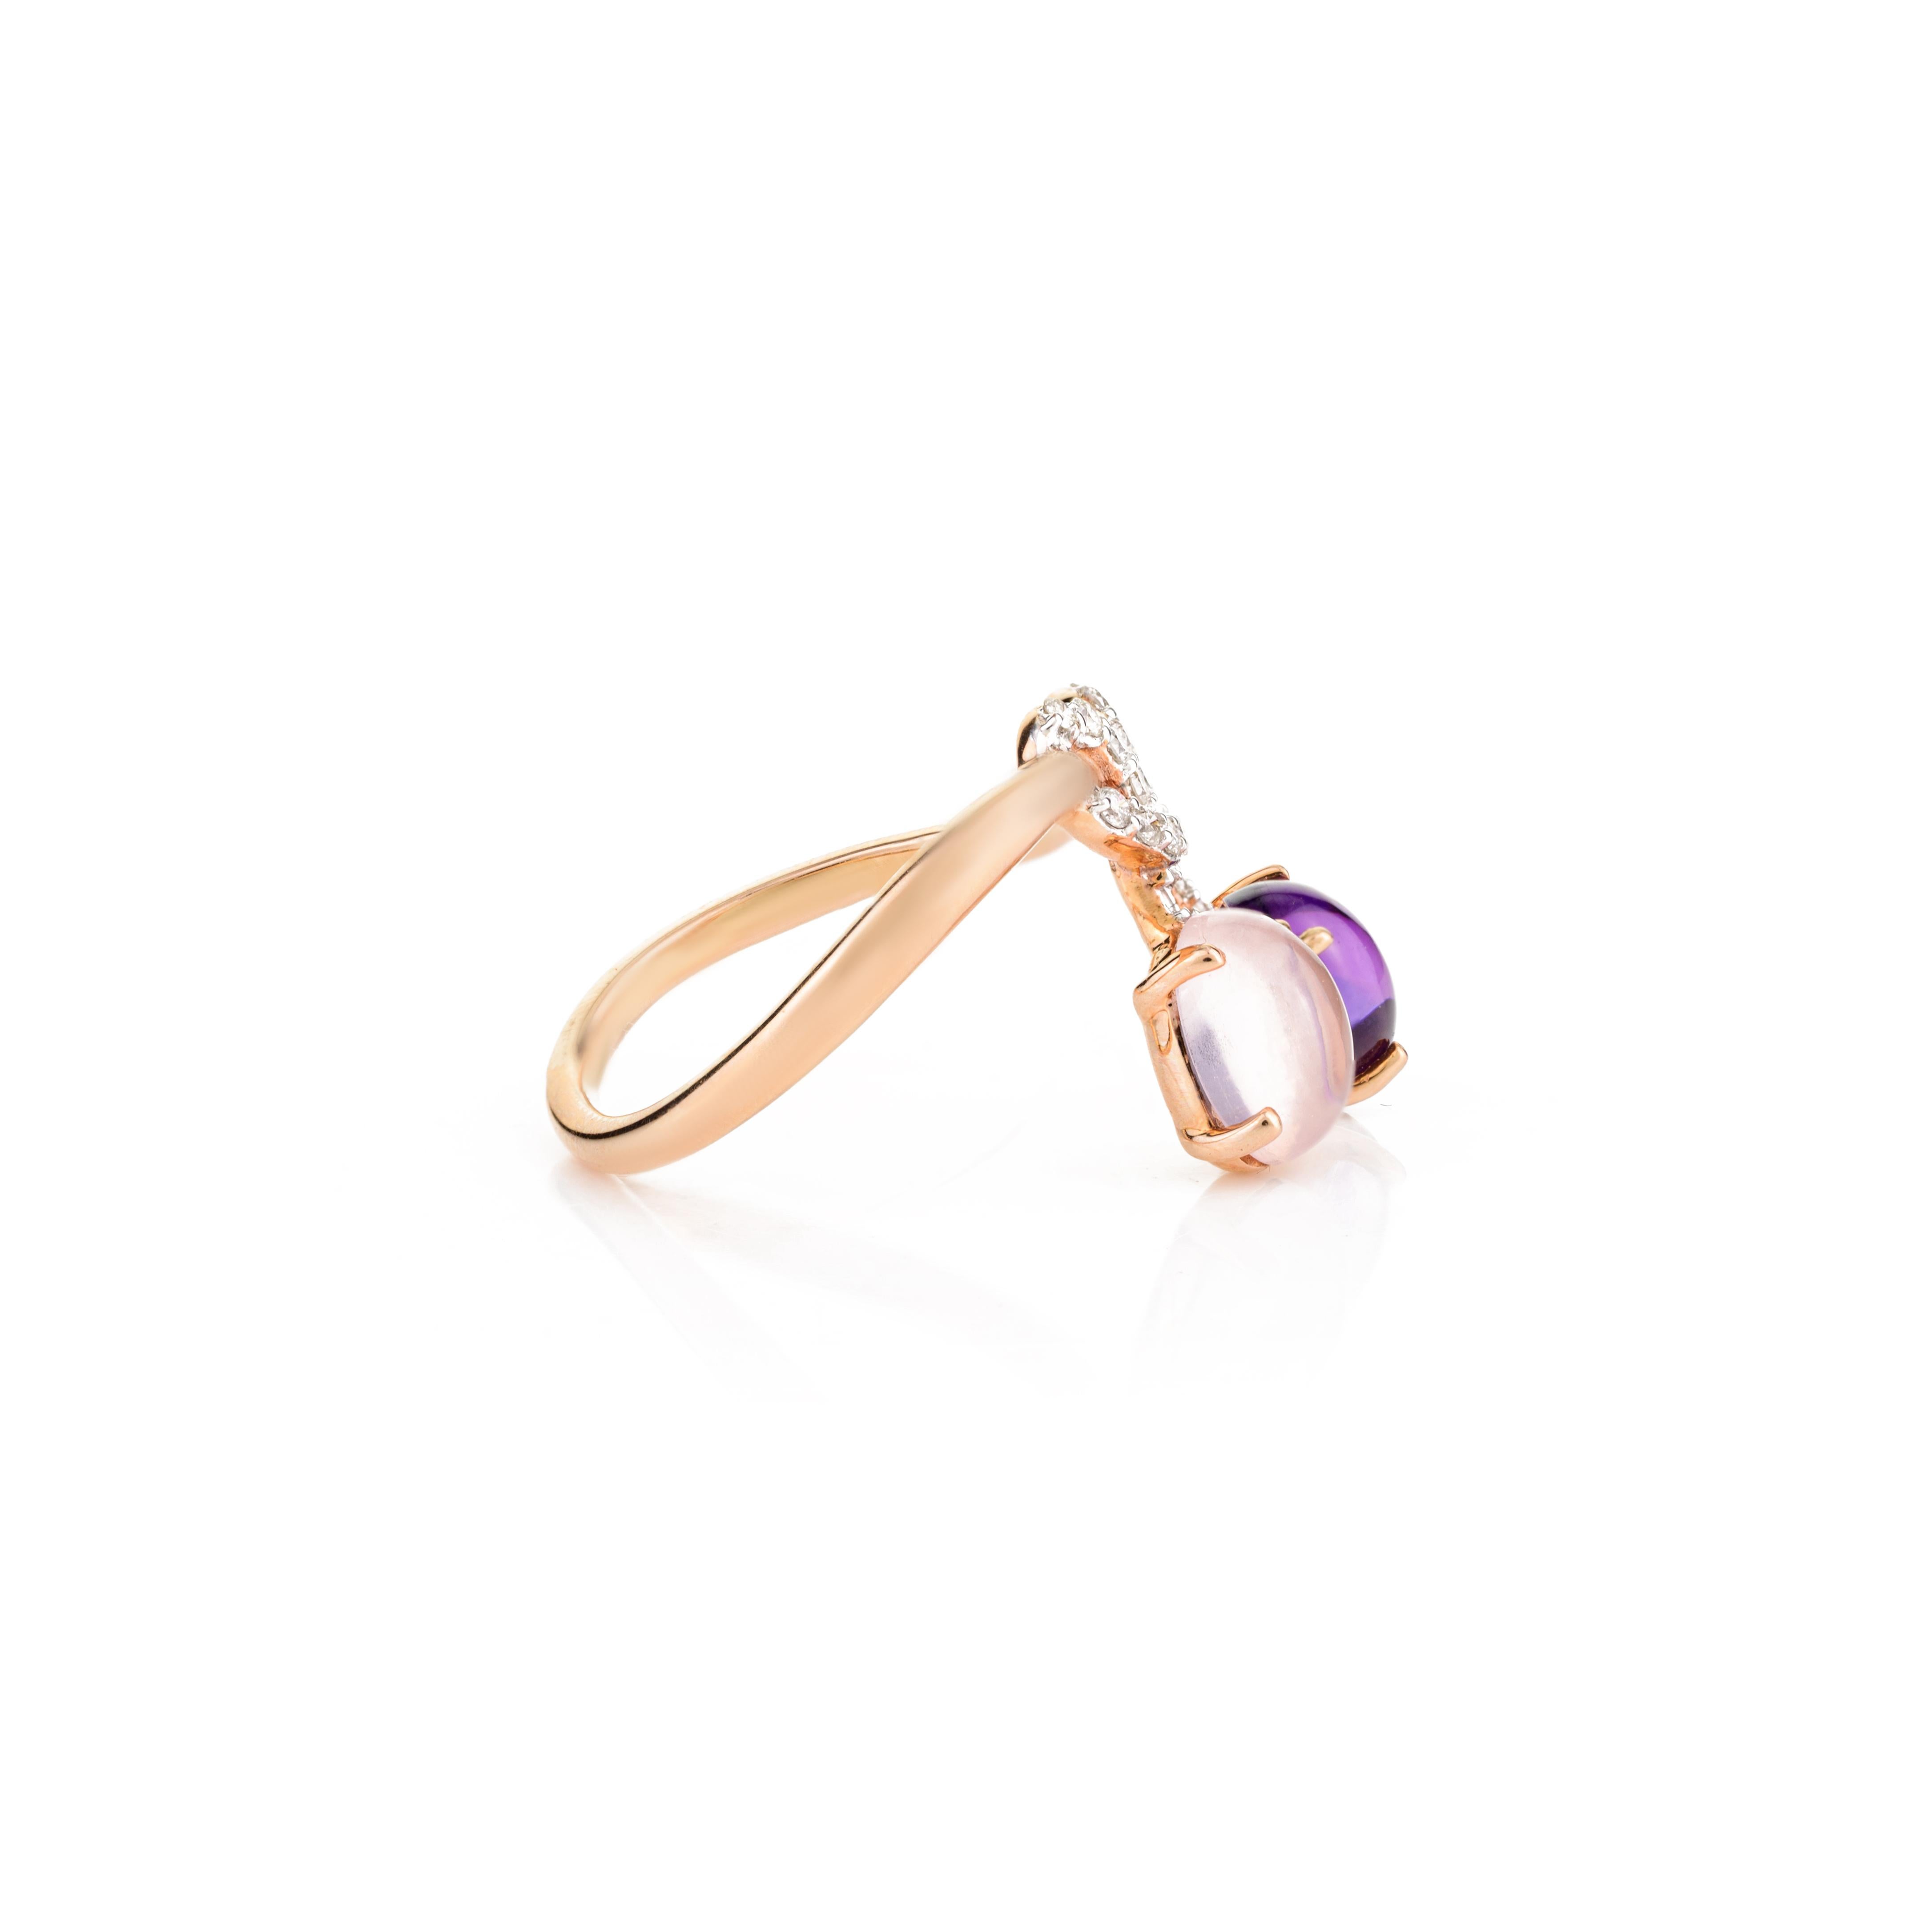 For Sale:  Statement Amethyst and Rose Quartz Ring with Diamond Bow 18k Solid Rose Gold 2